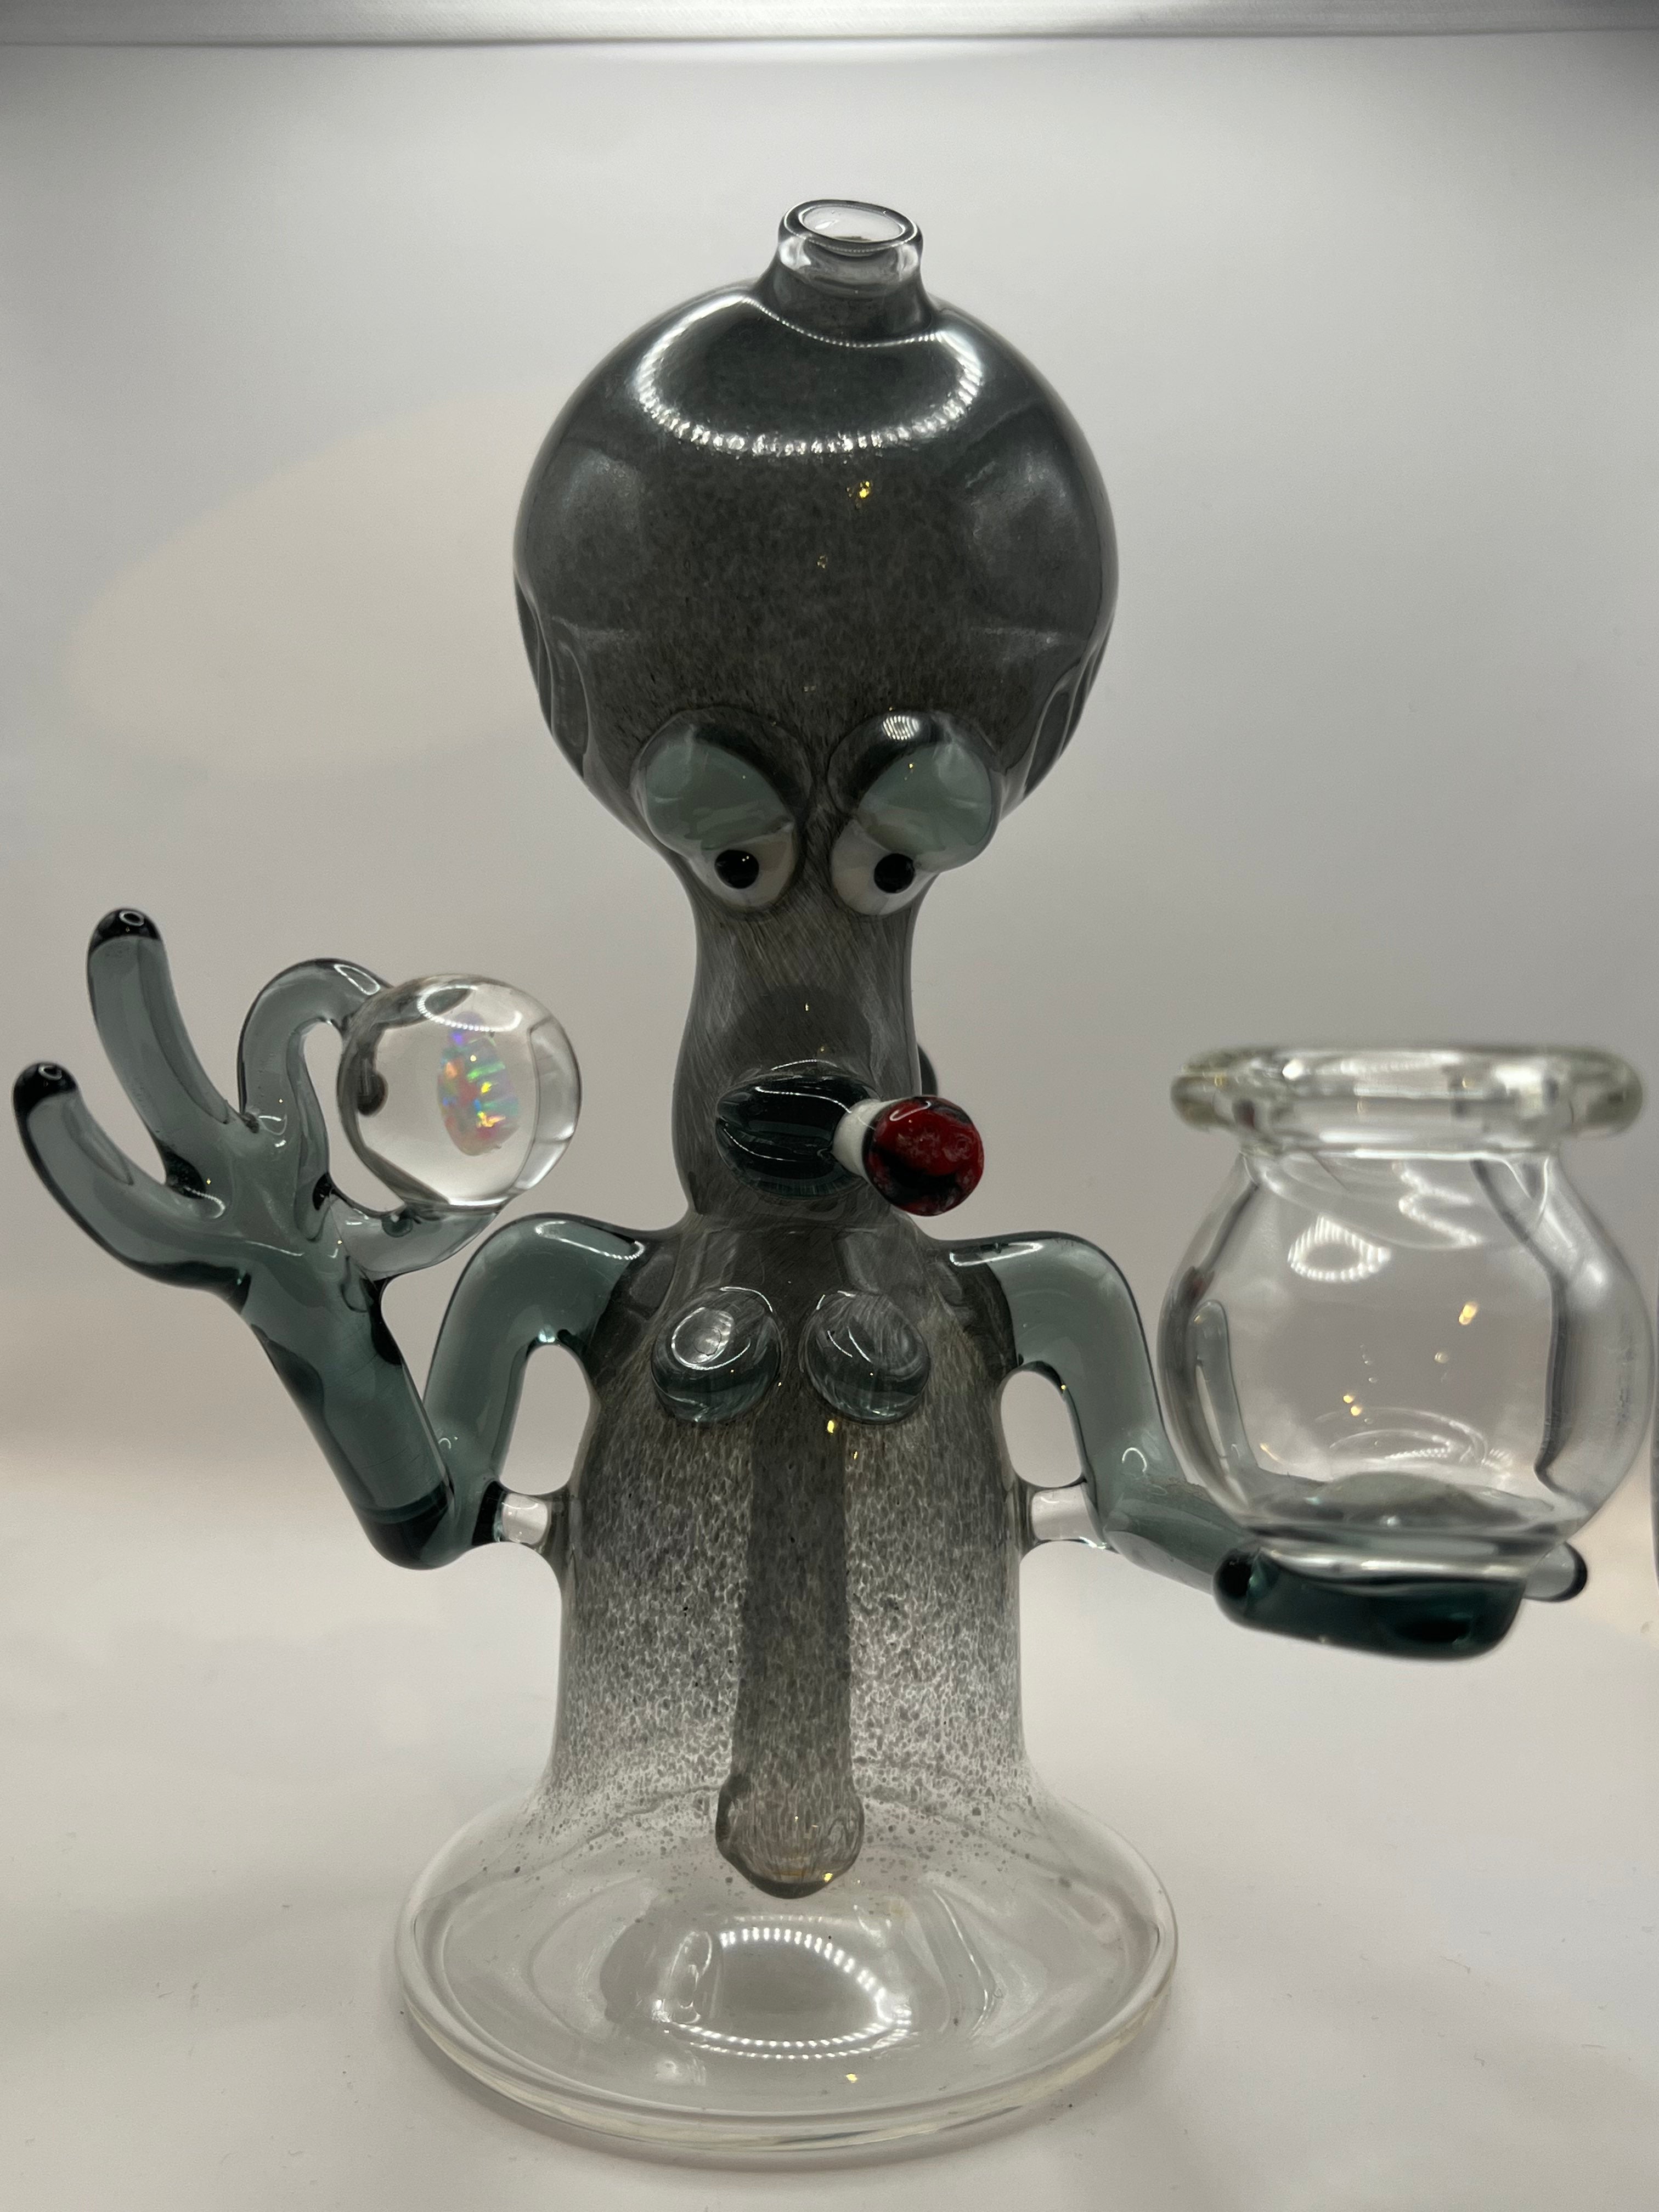 Roger by PuffGlass